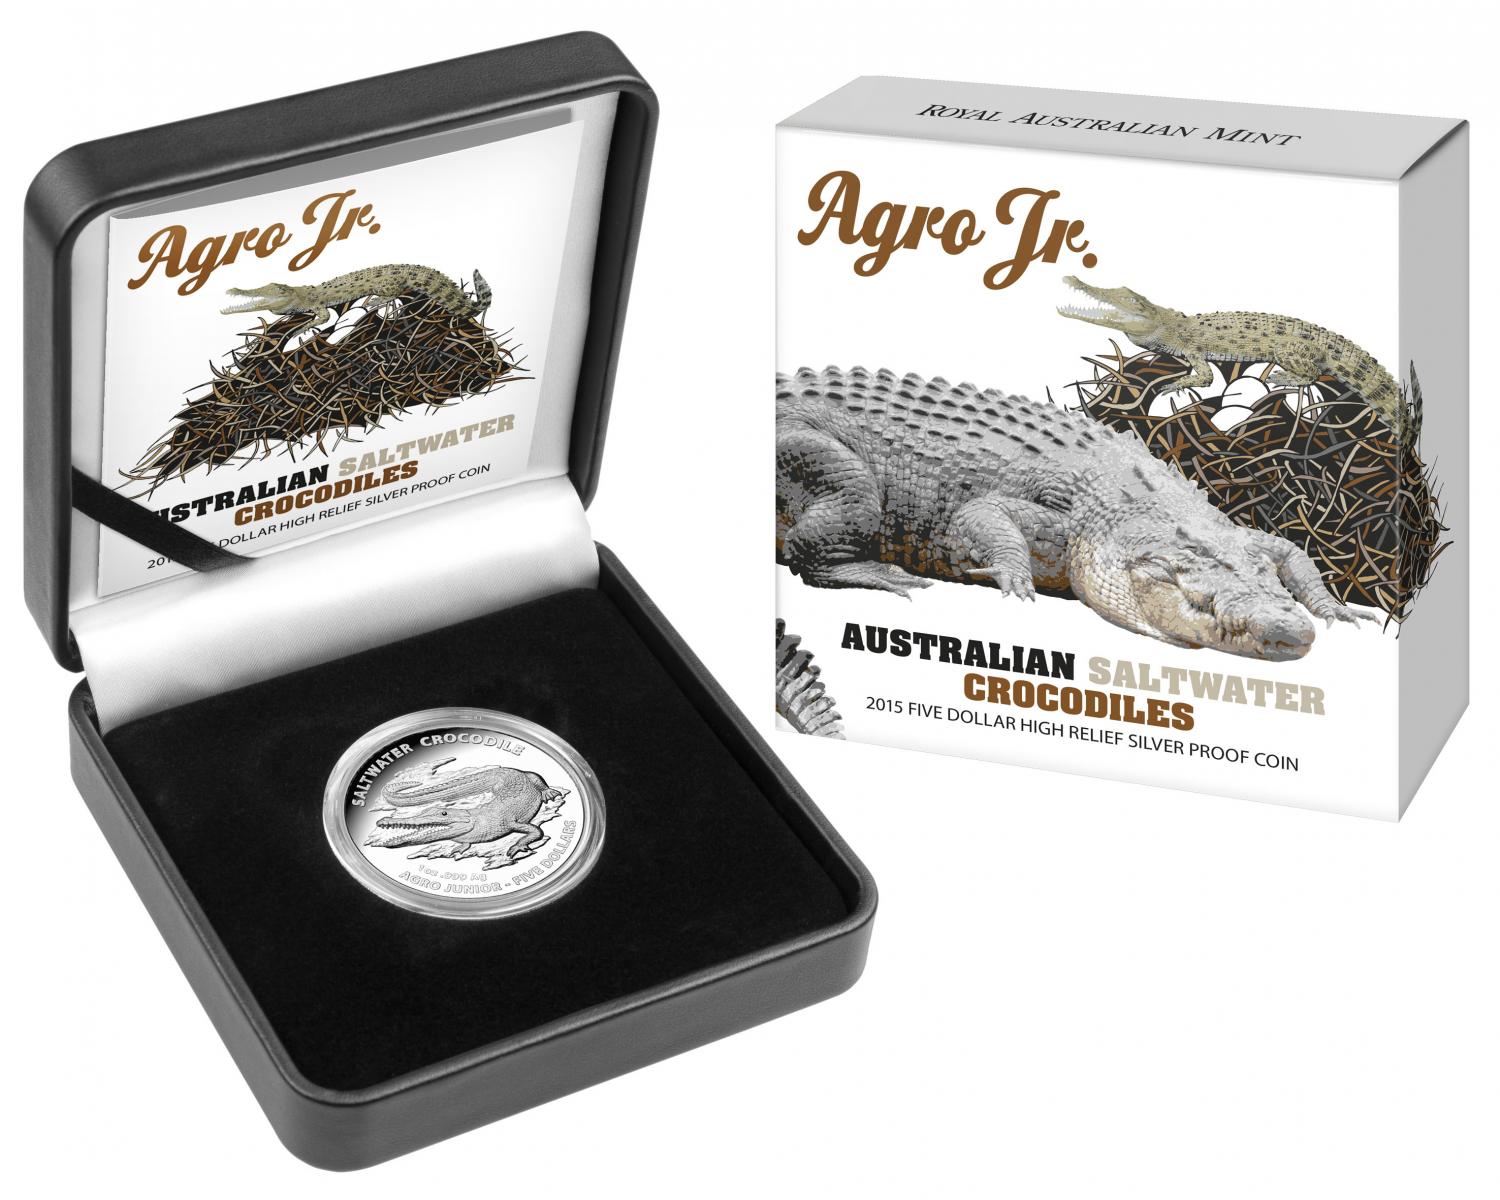 Thumbnail for 2015 $5 High Relief Silver Proof Coin - Saltwater Crocodiles Agro Jr.